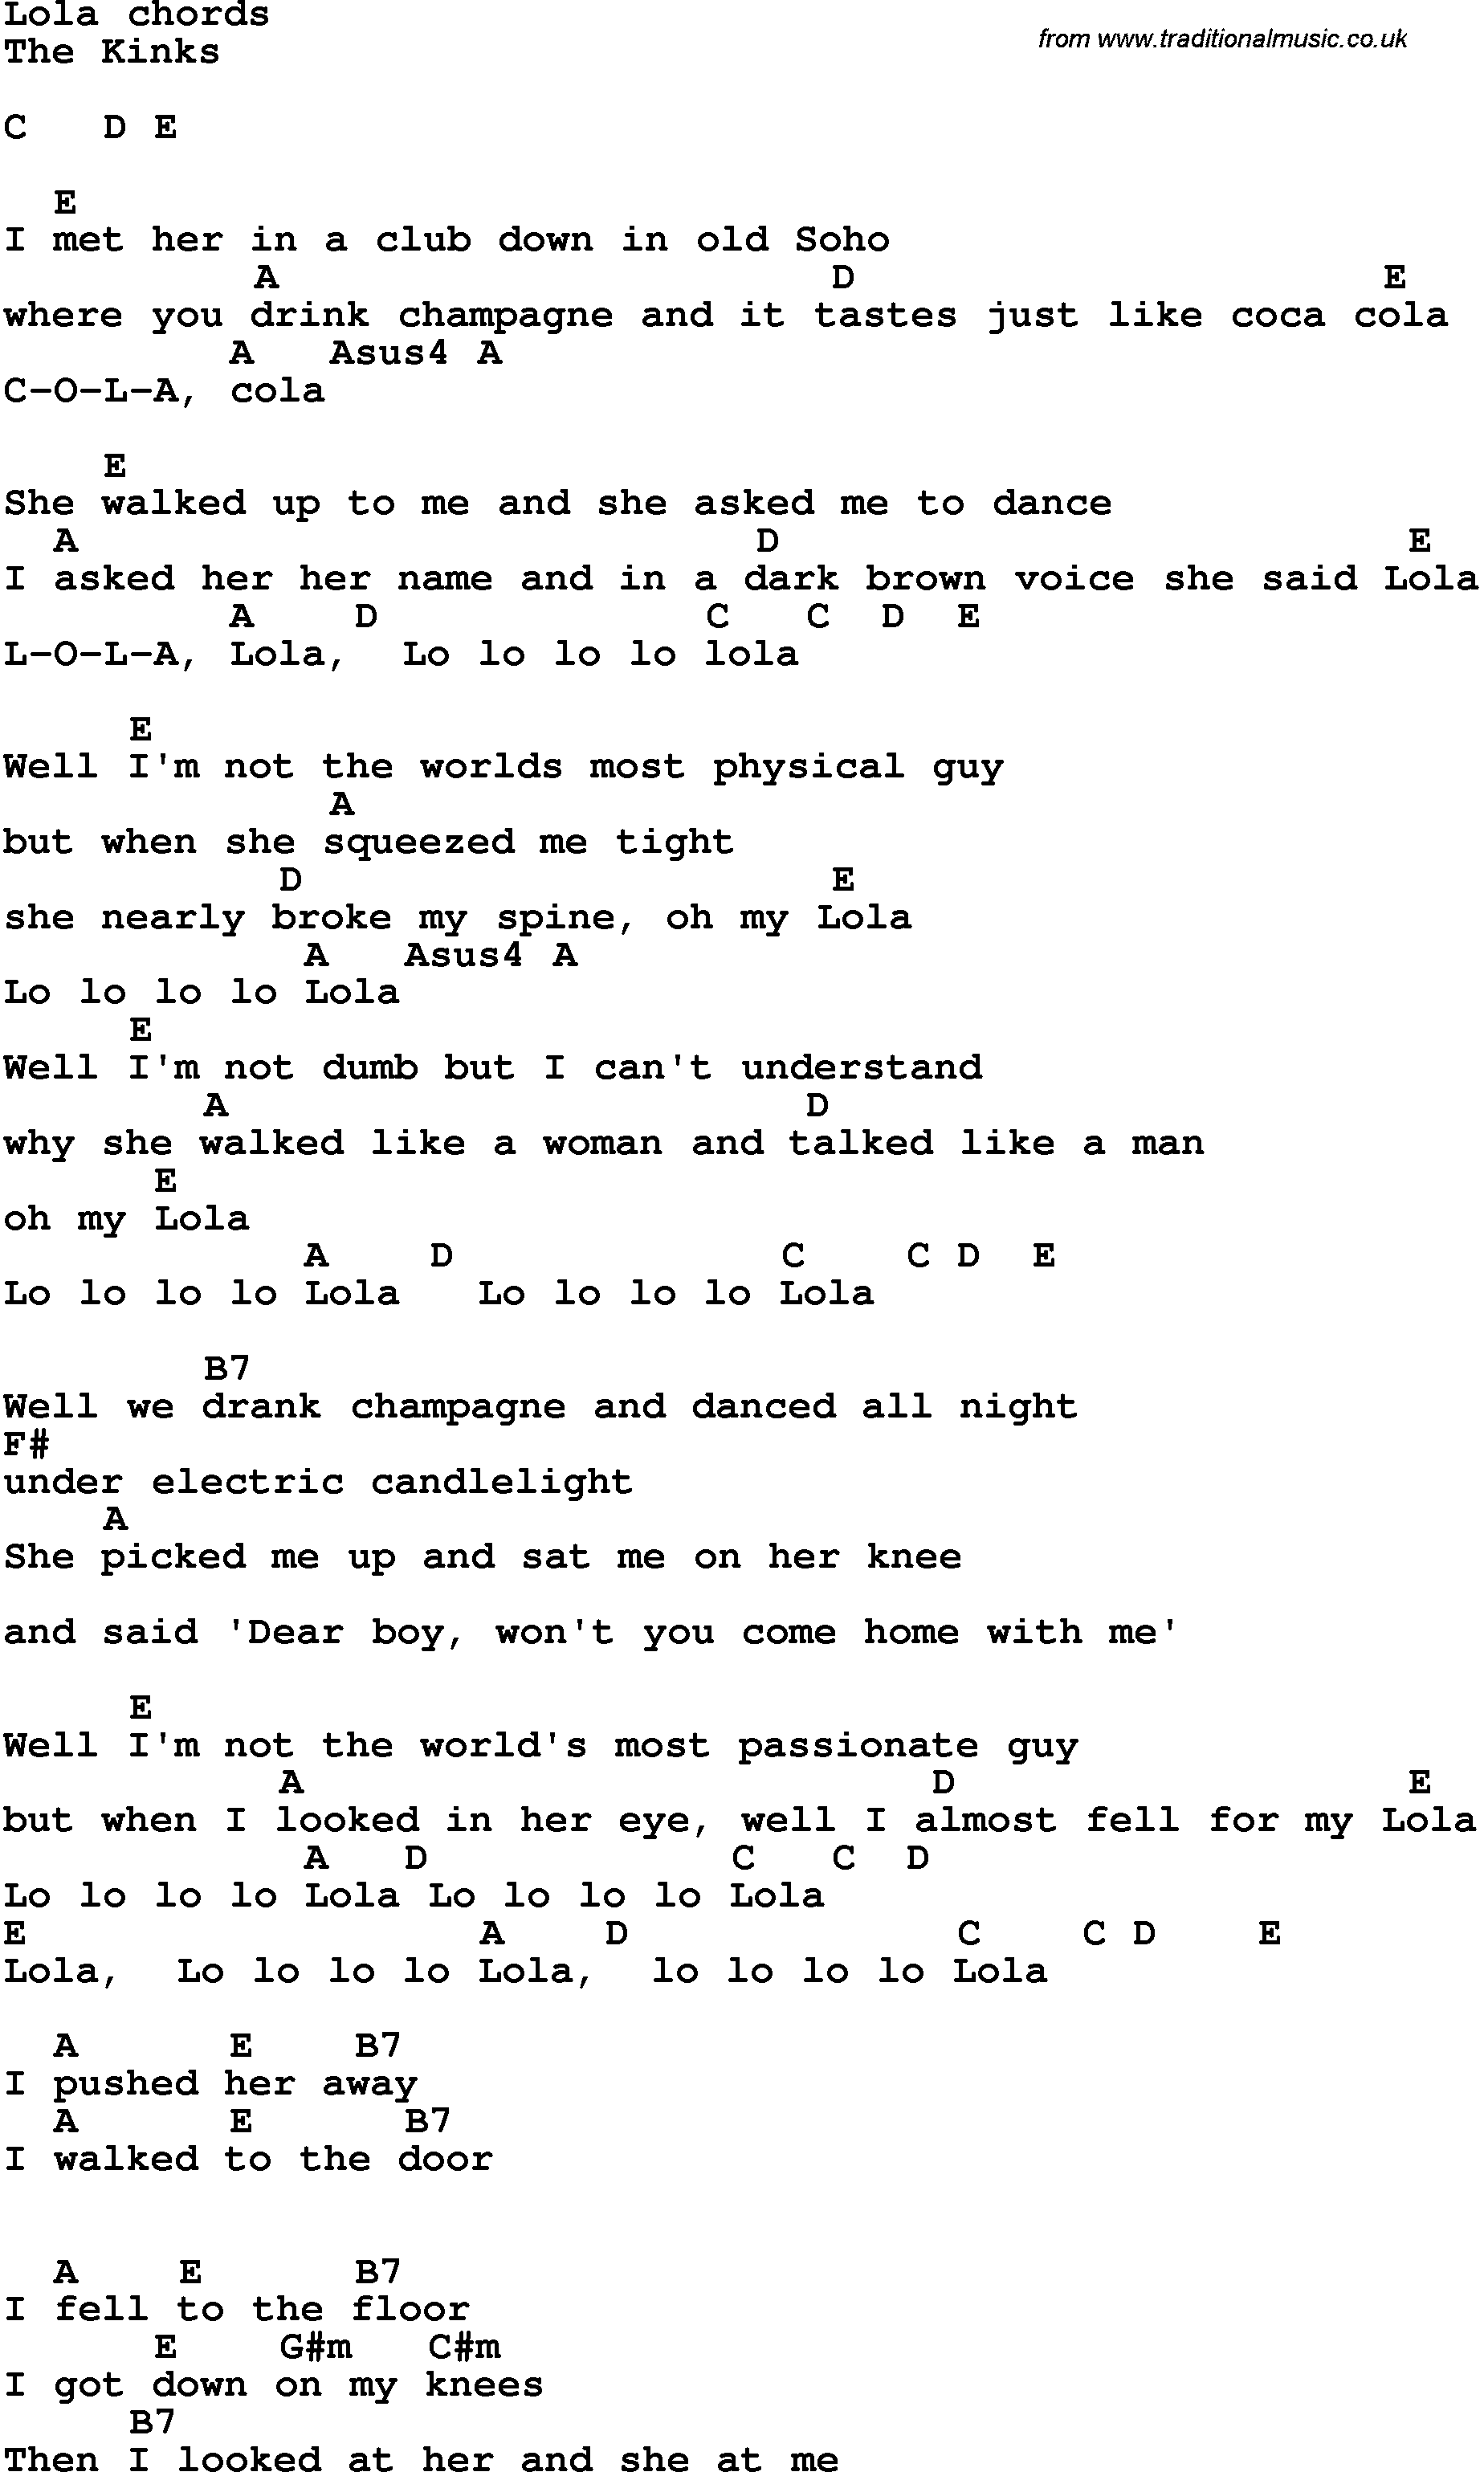 Song Lyrics with guitar chords for Lola